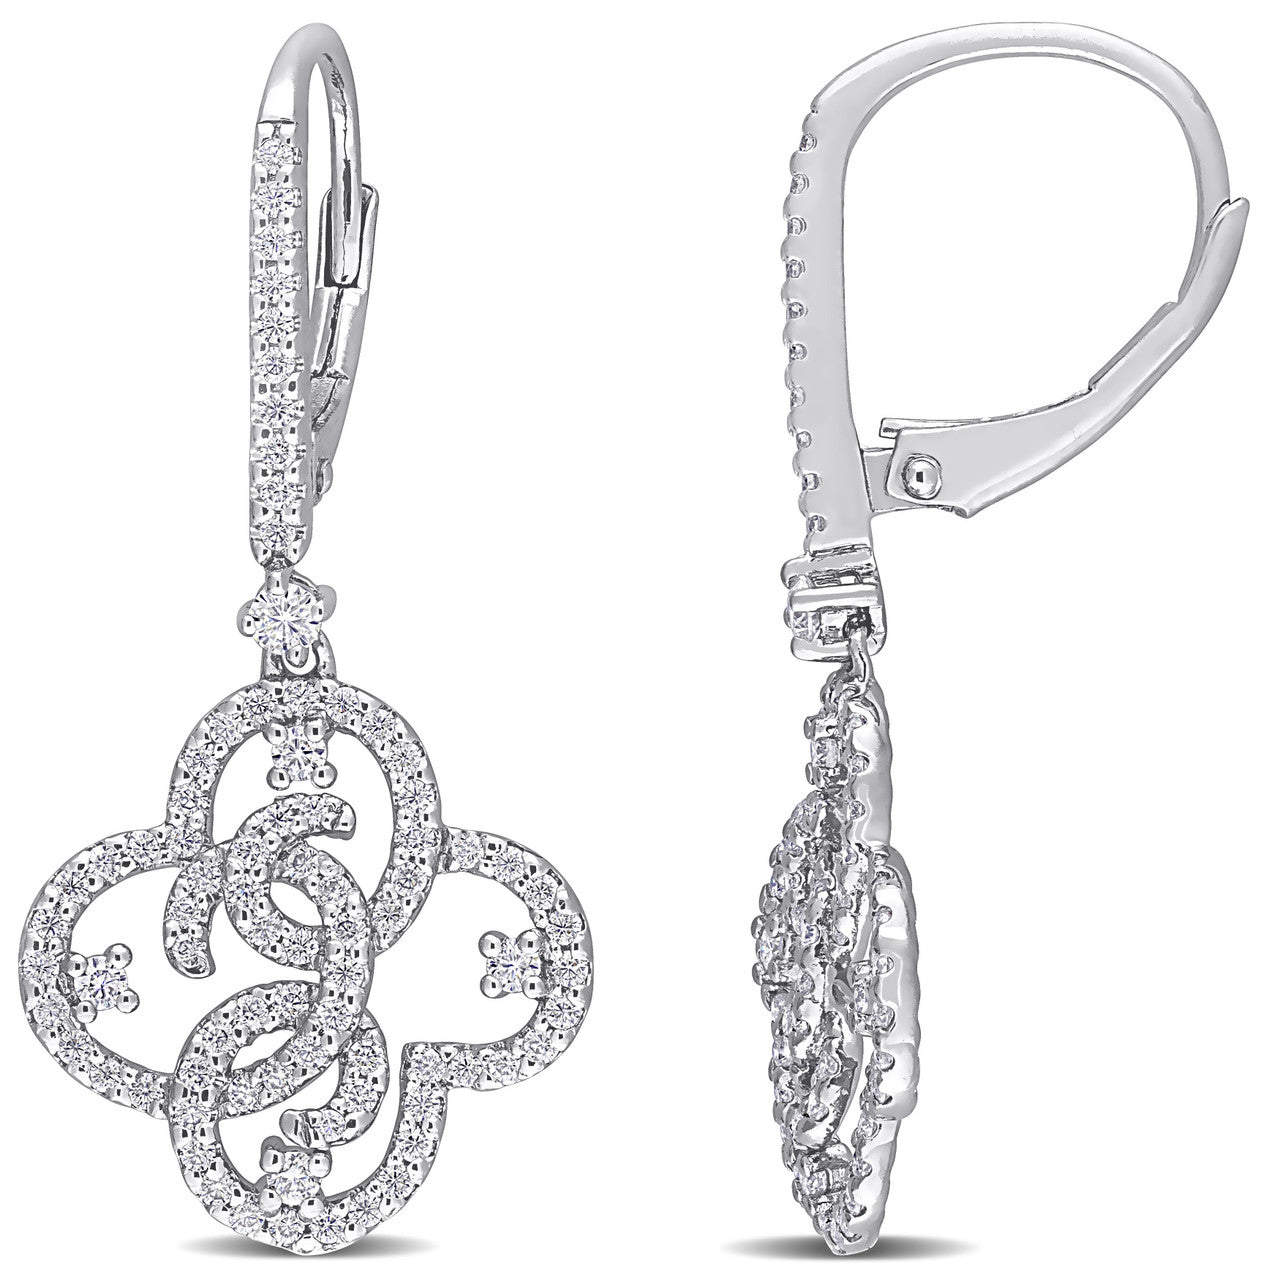 Ice Jewellery 1 CT Created Moissanite-White Floral Drop Earrings in Sterling Silver - 75000005774 | Ice Jewellery Australia